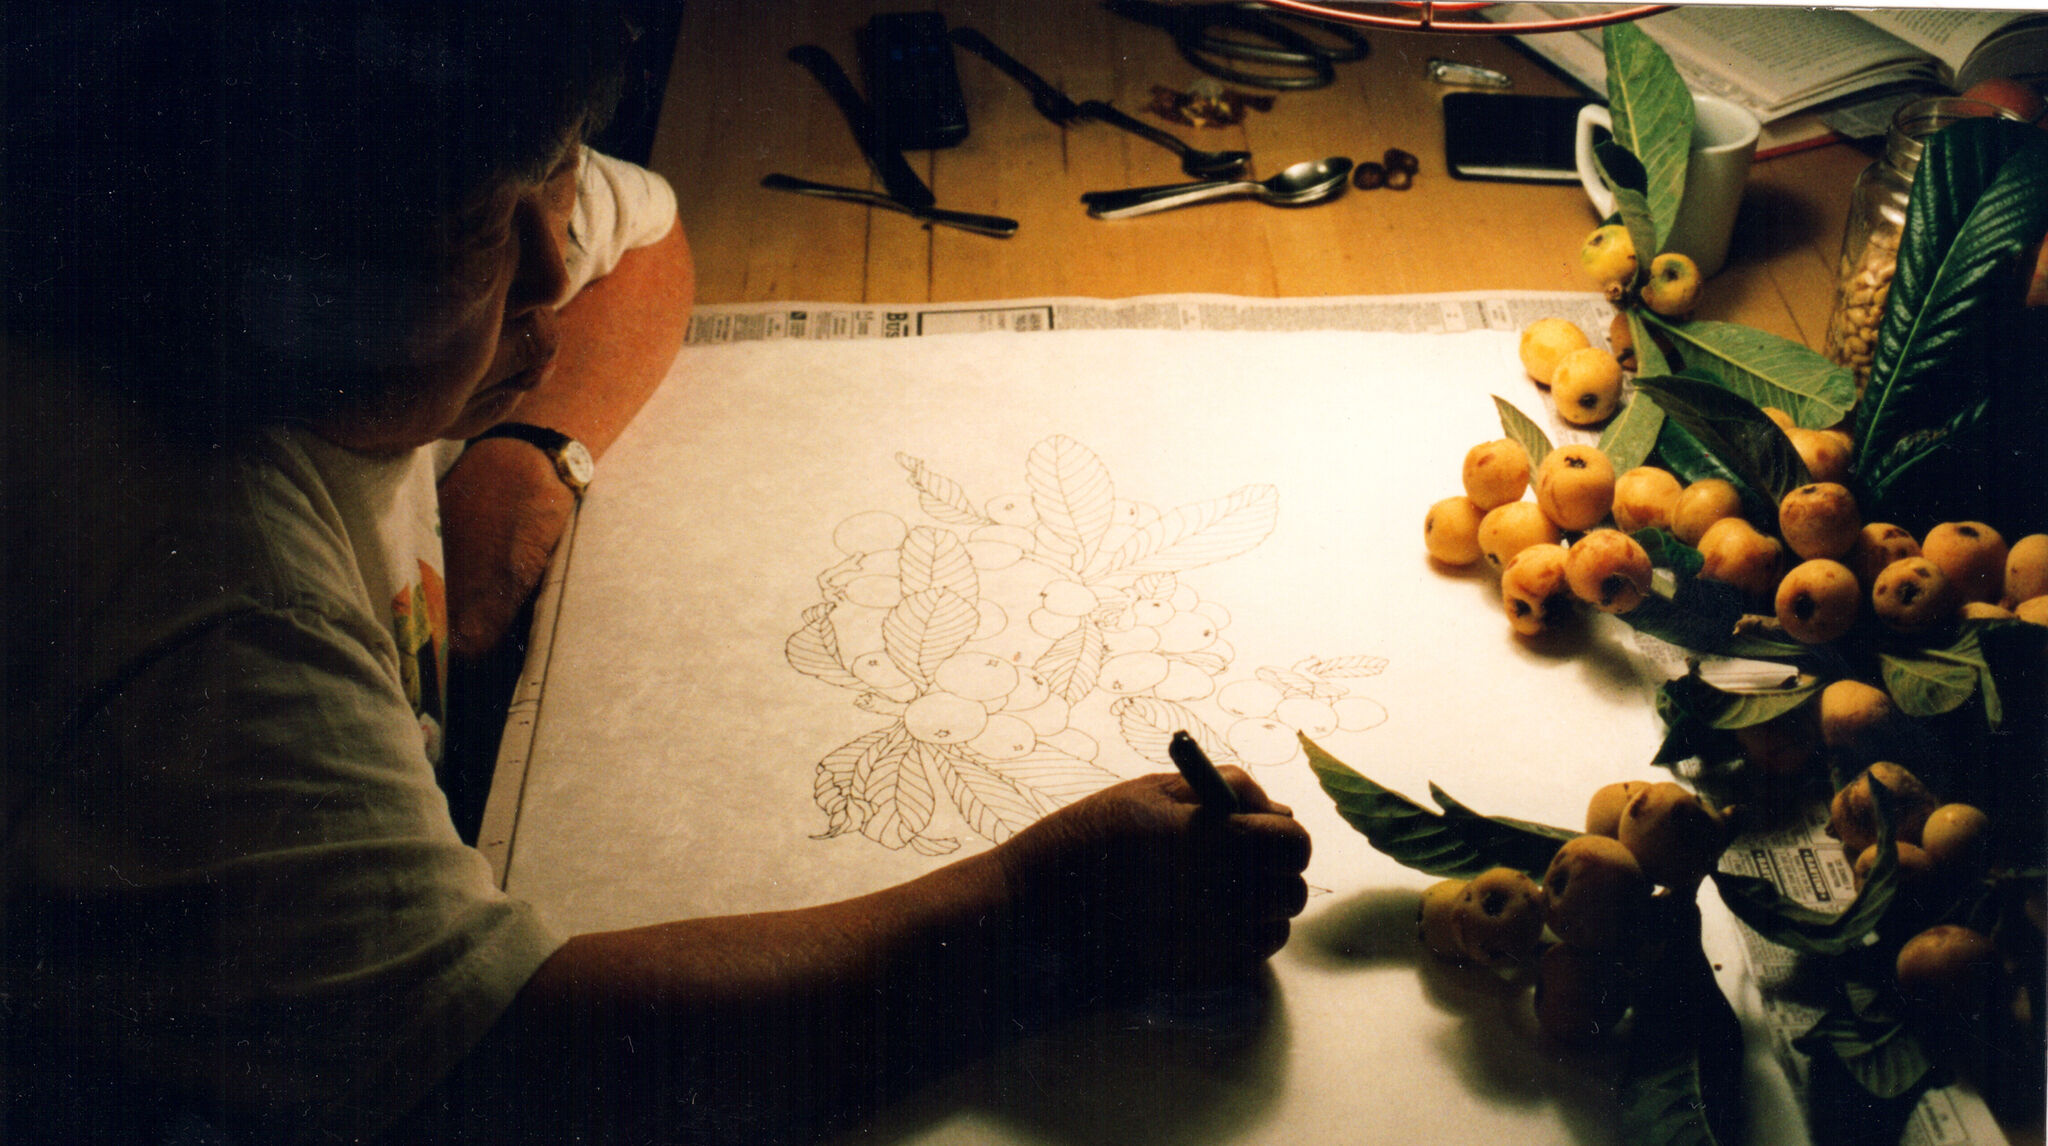 In a dark room a woman draws fruit while sitting at a table.